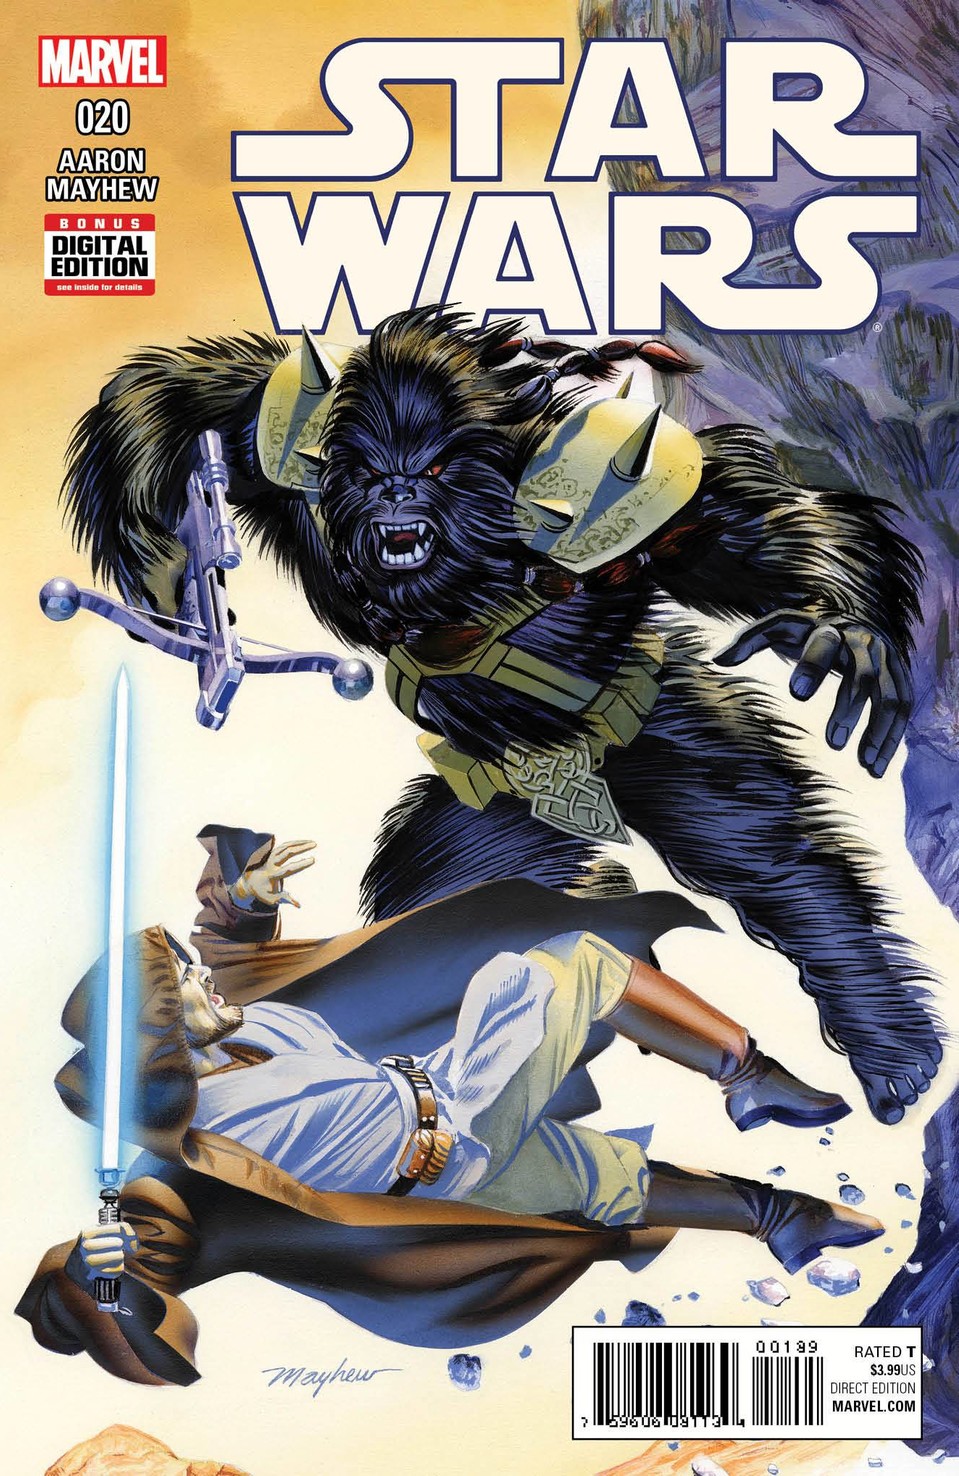 Ben Kenobi fighting Black Krrsantan in issue 20 of the Marvel Star Wars comic.  Image source: Lucasfilm and Marvel, comic book cover by Mike Mayhew.